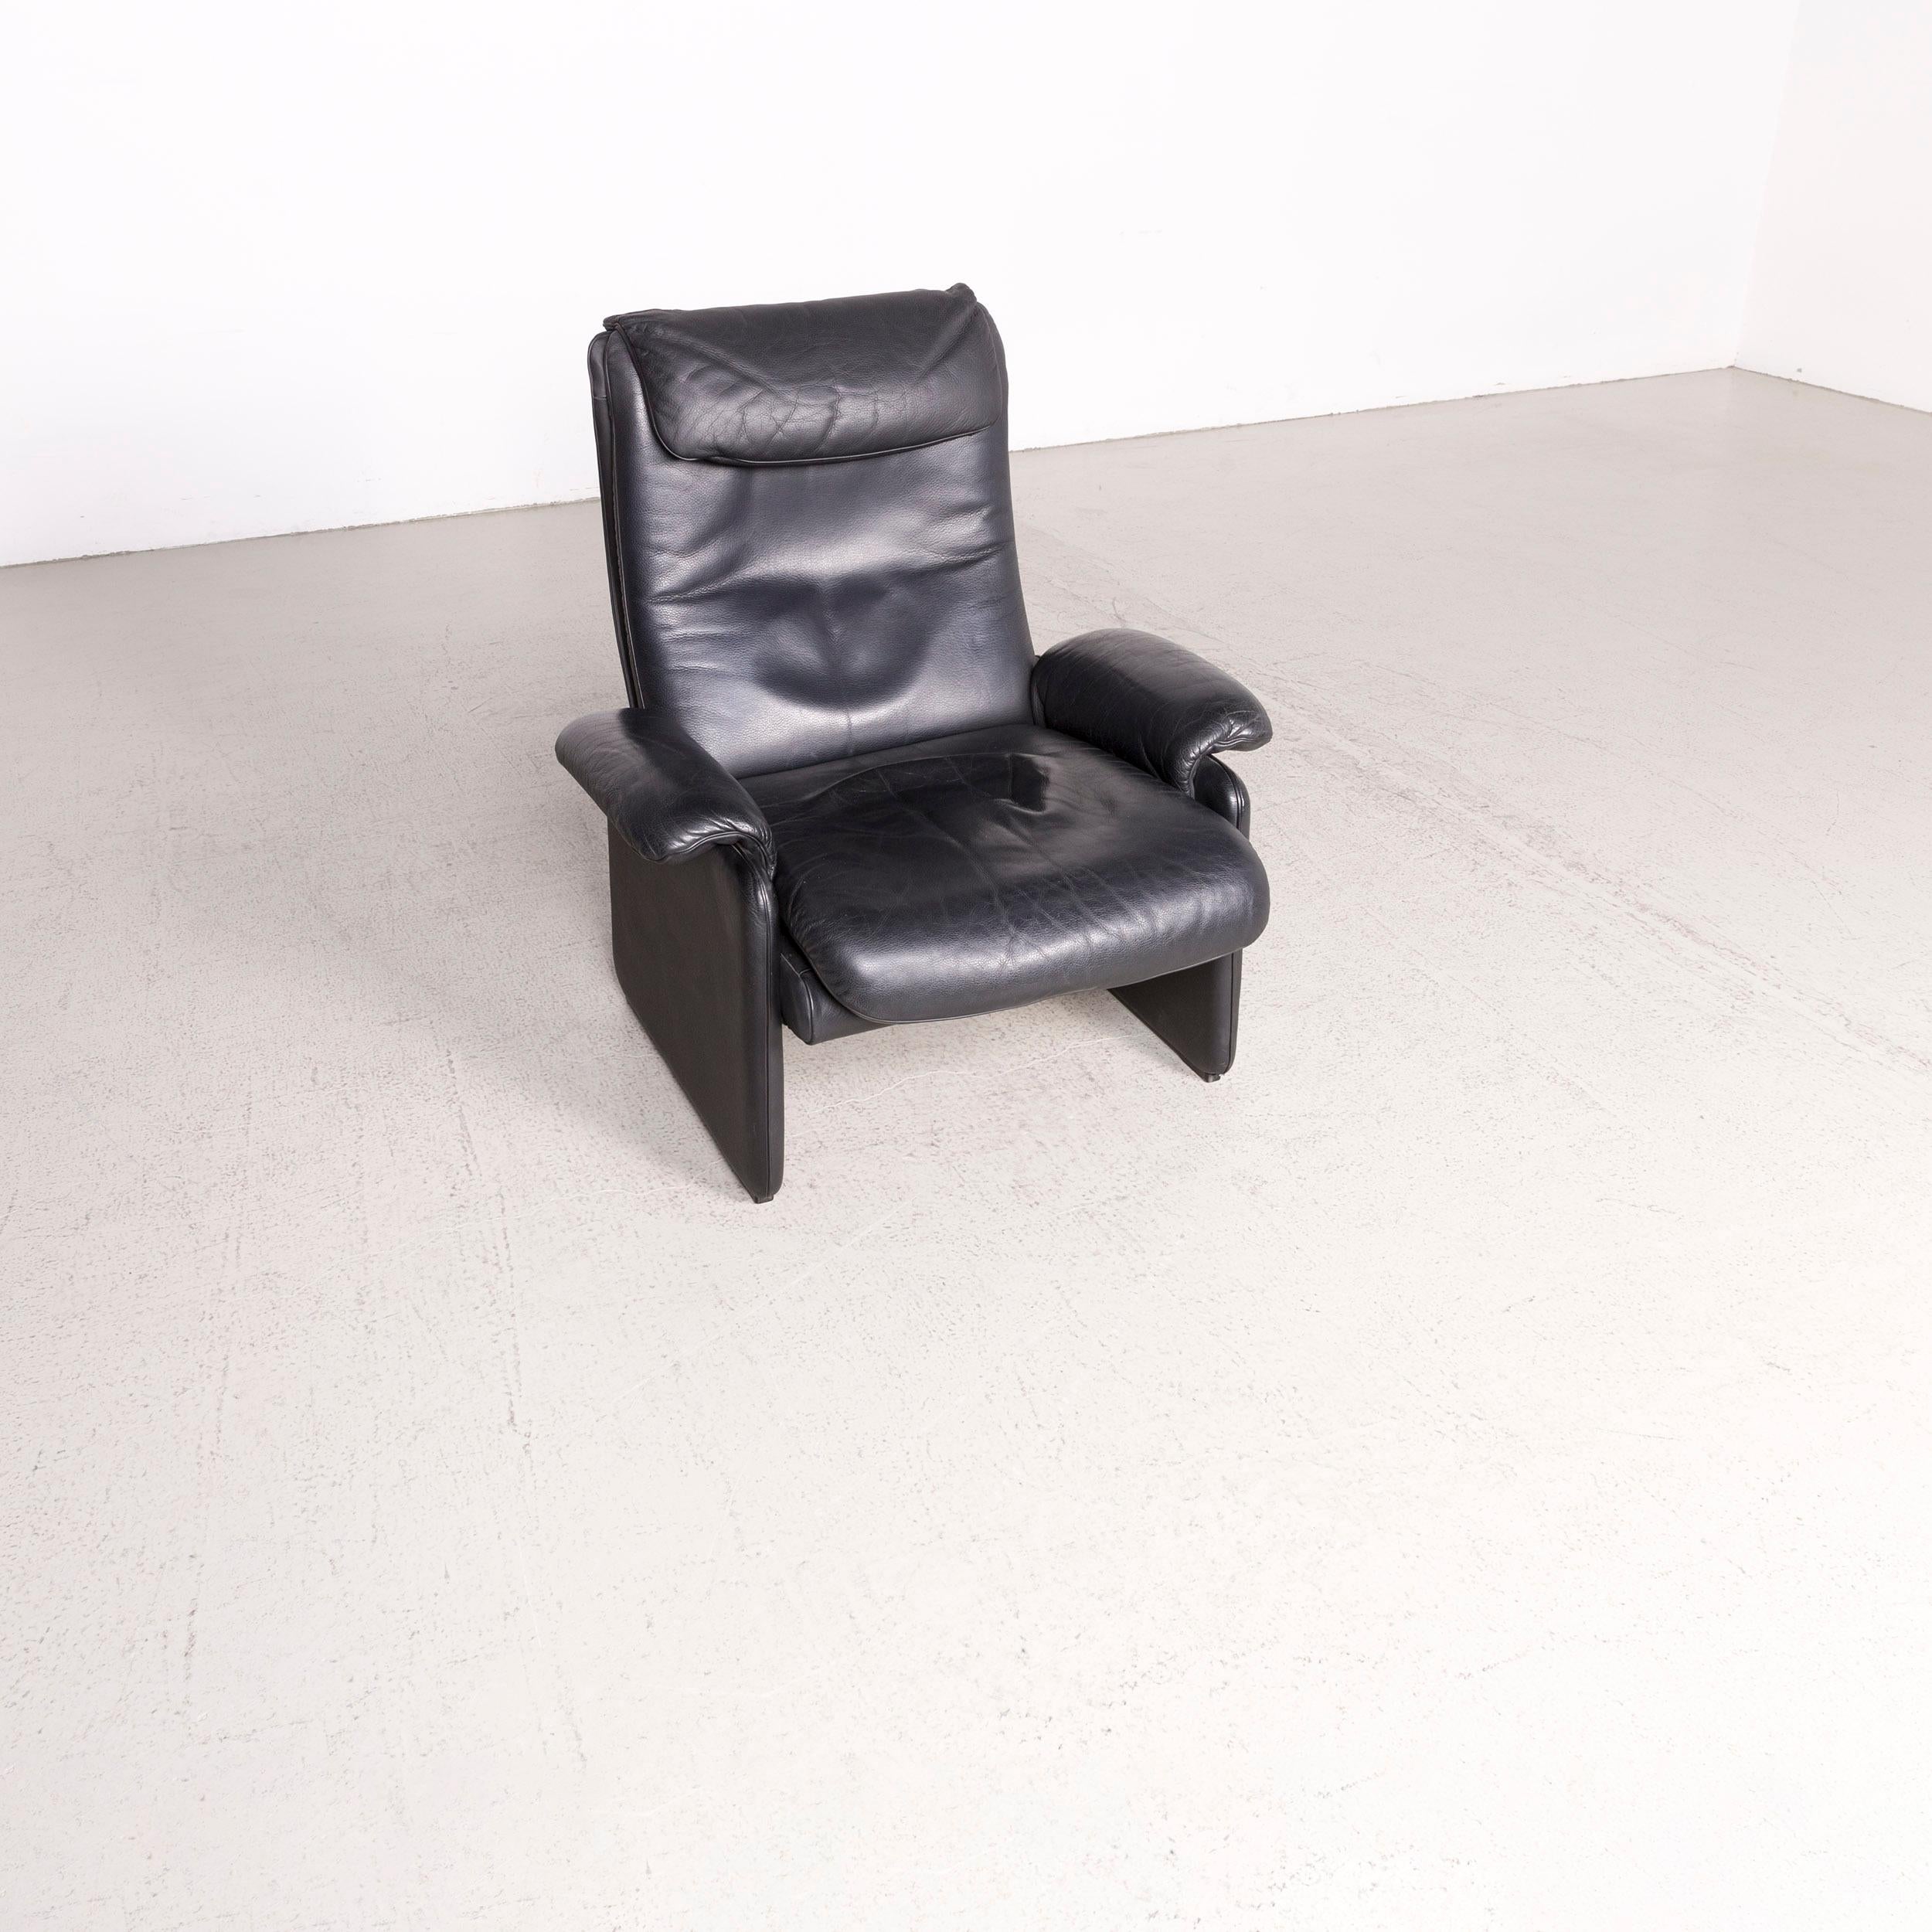 We bring to you a De Sede DS 50 leather armchair black genuine leather.

 Product measurements in centimeters:
 
Depth: 85
Width: 90
Height: 95
Seat-height: 45
Rest-height: 55
Seat-depth: 55
Seat-width: 50
Back-height: 65.
 